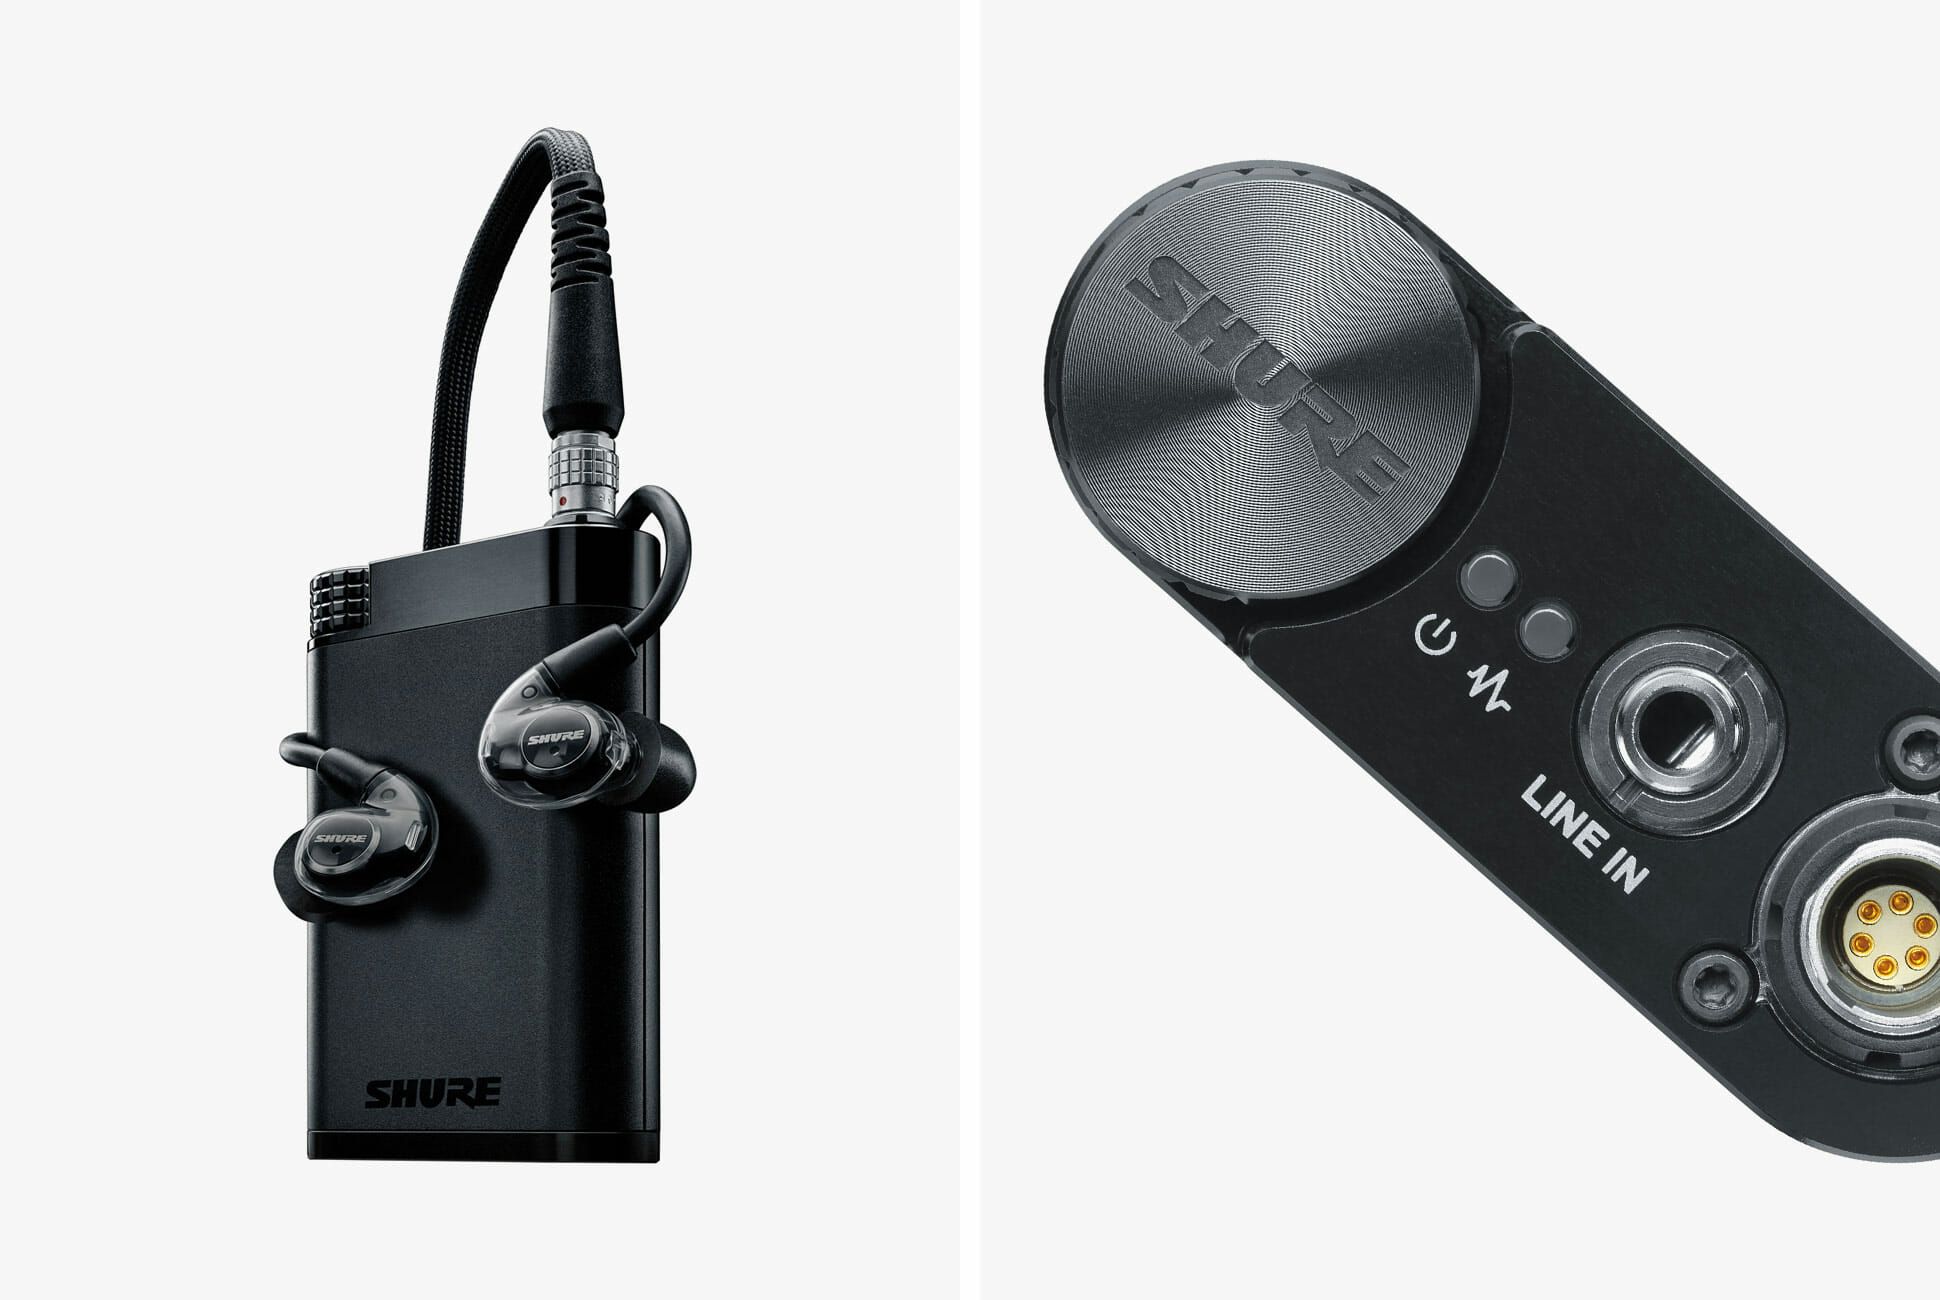 Shure Makes Portable Hi-Fi More Affordable With Its New Earphone